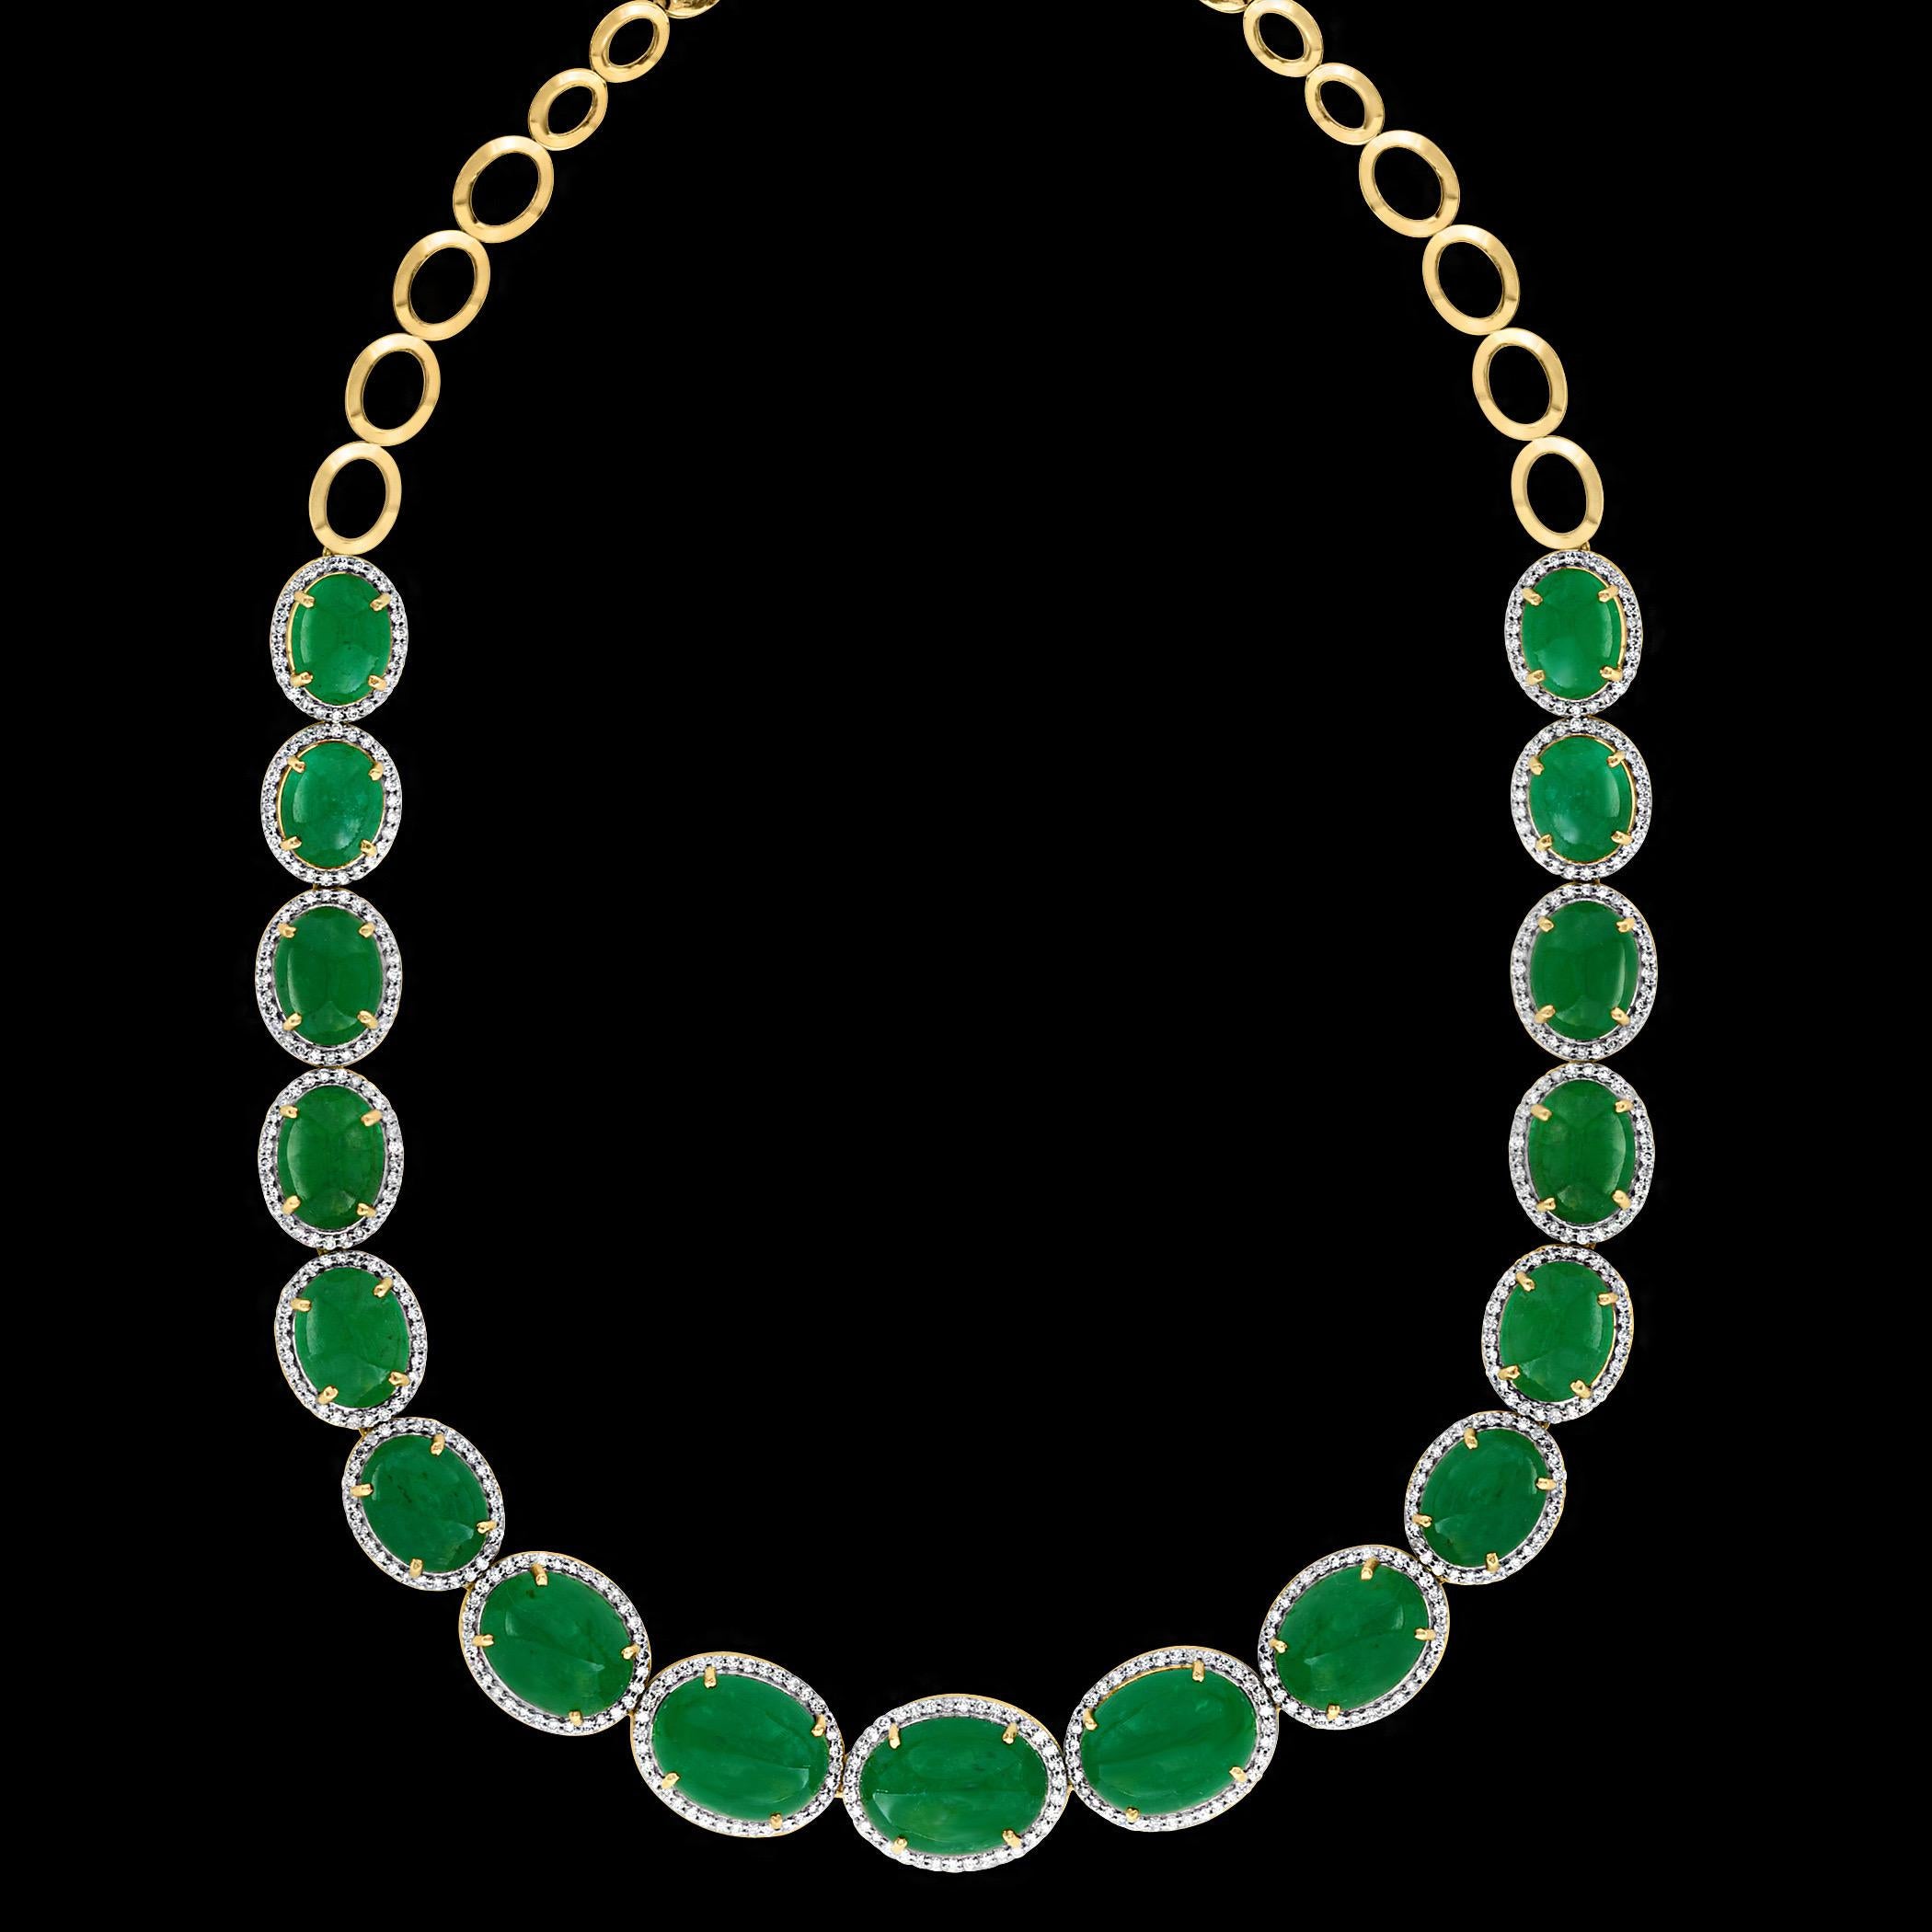 110 Ct Oval Natural Cabochon Emerald & Diamond Necklace, Earring Suite 14 K Gold For Sale 3